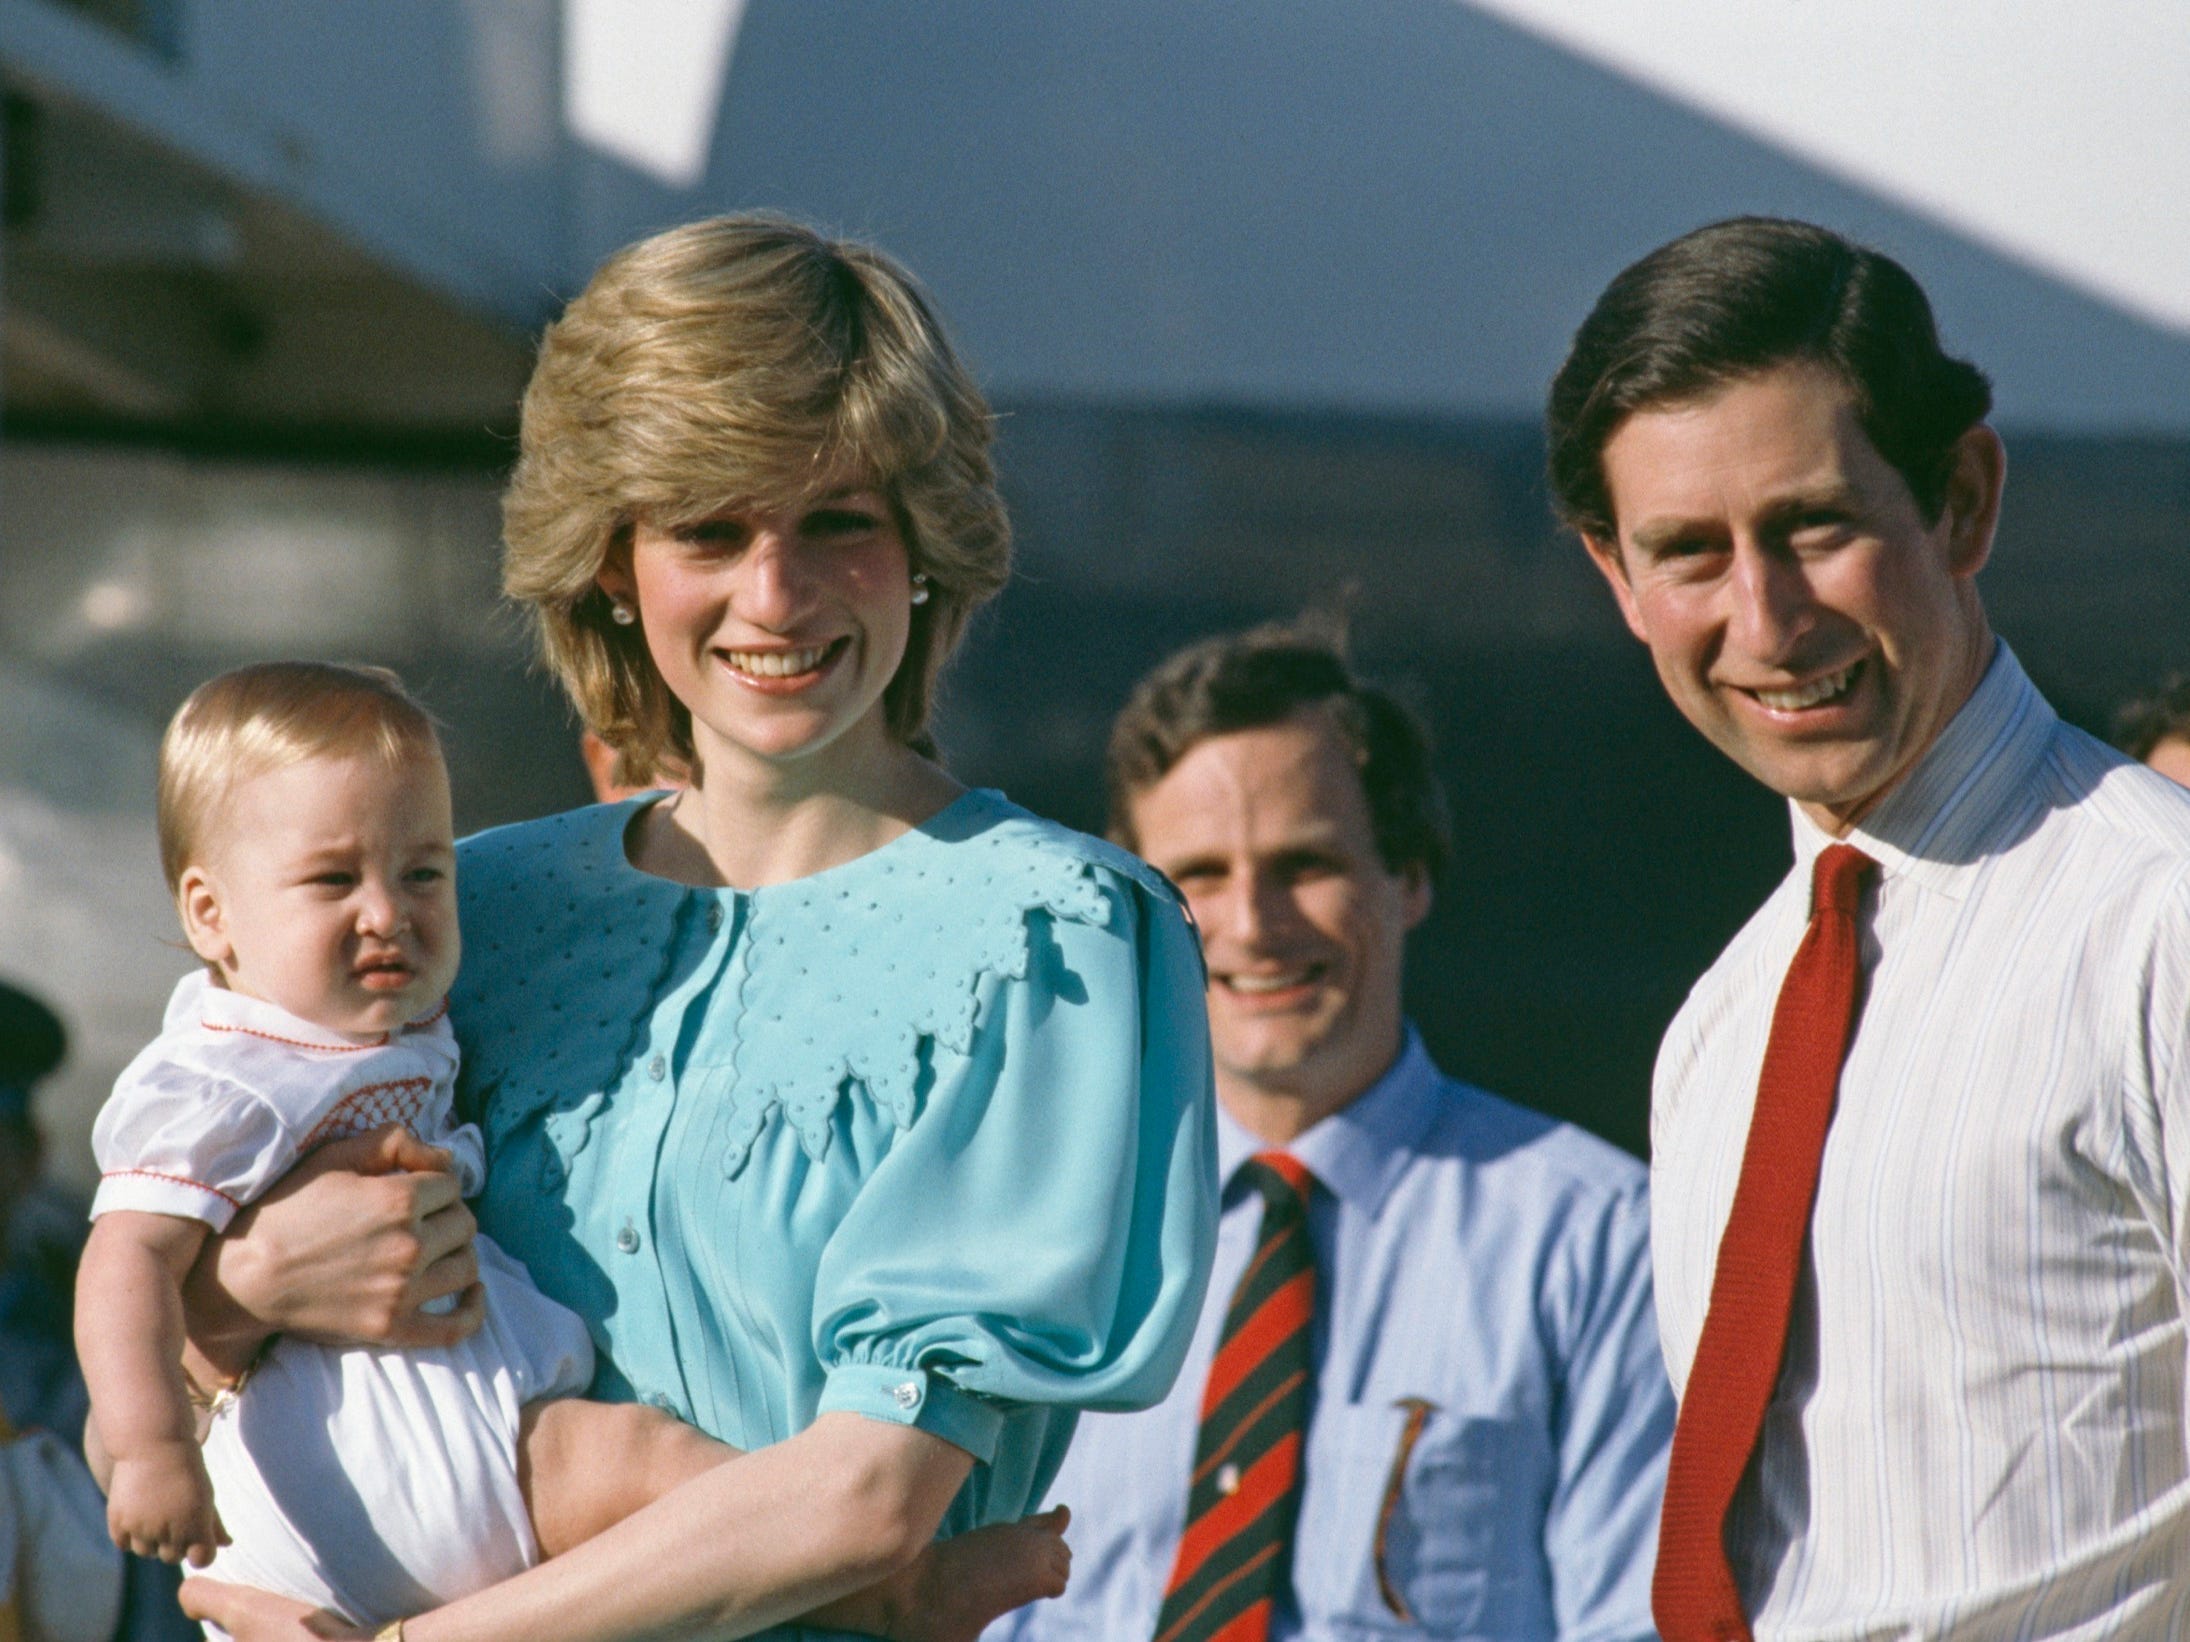 Delve into the deep influence Princess Diana's death had on a young Prince William, and marvel at how royal destiny, Shakespearean drama, and unconventional parenthood intertwine.